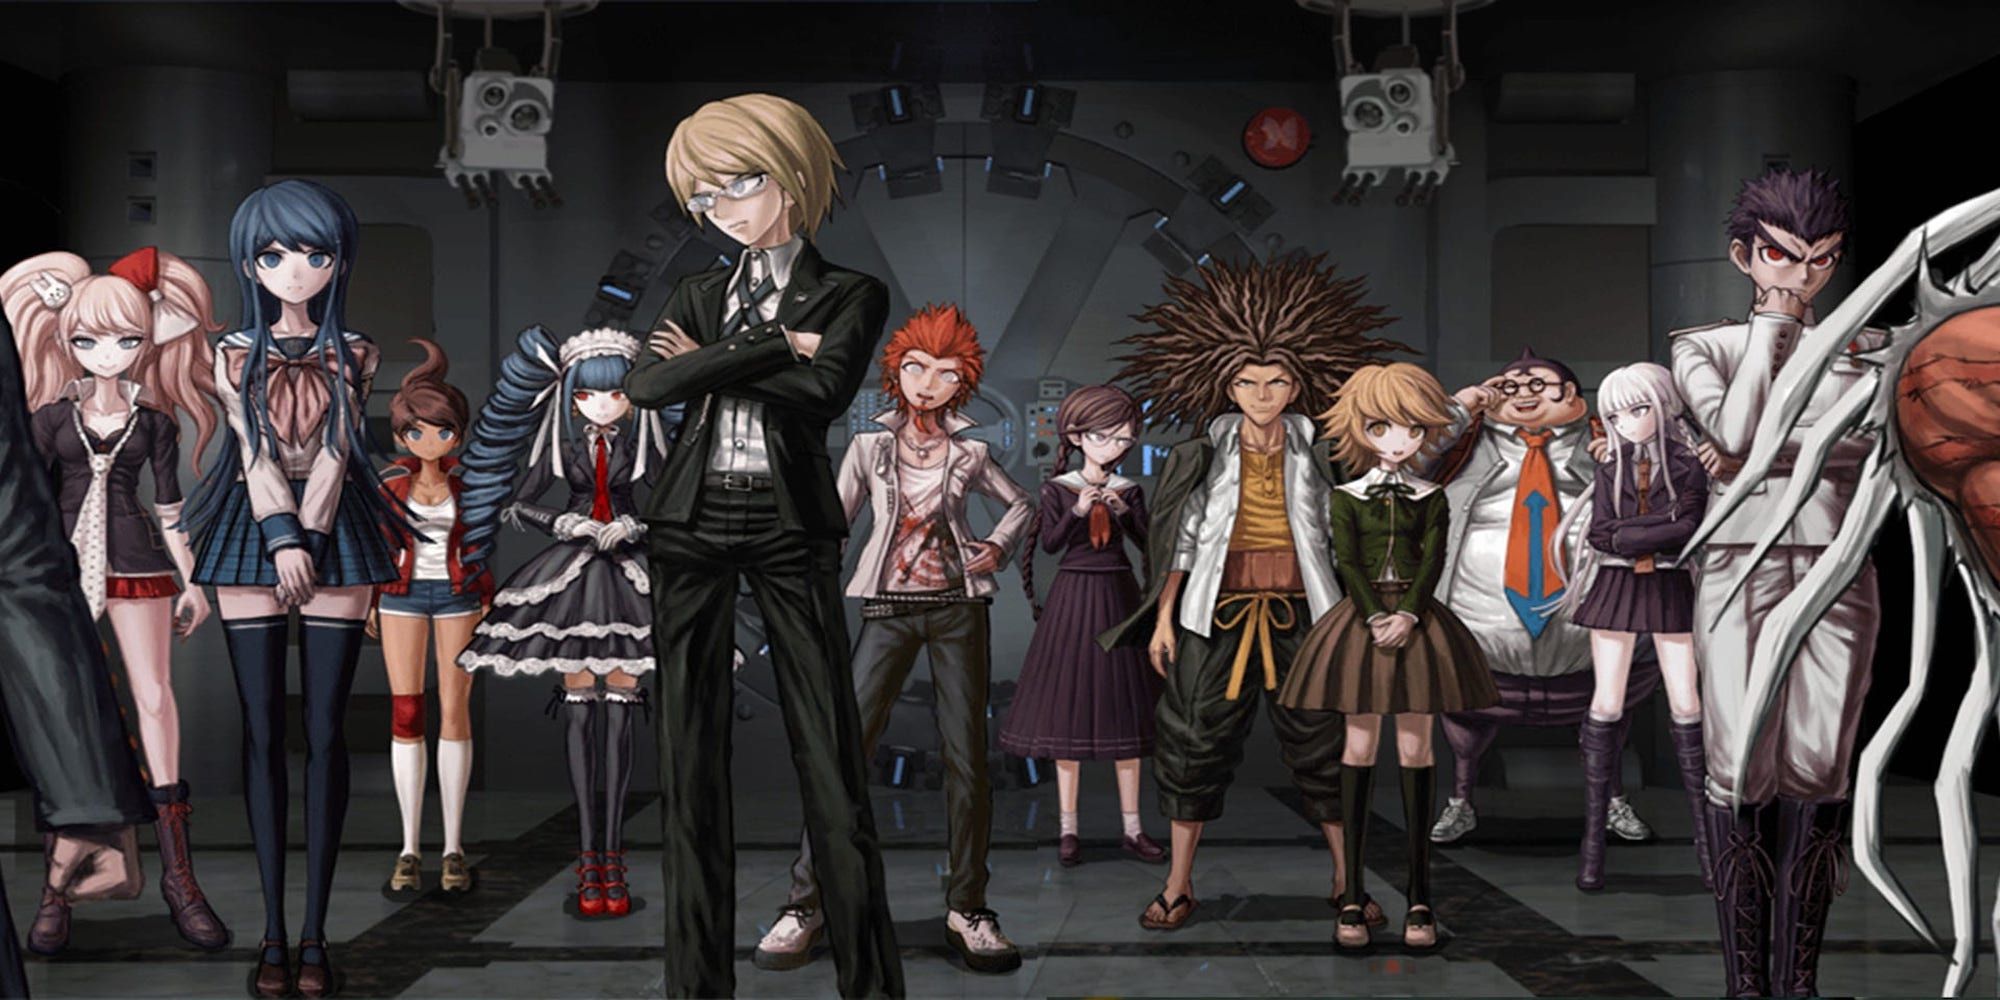 Characters all lined up from Danganronpa: Trigger Happy Havoc